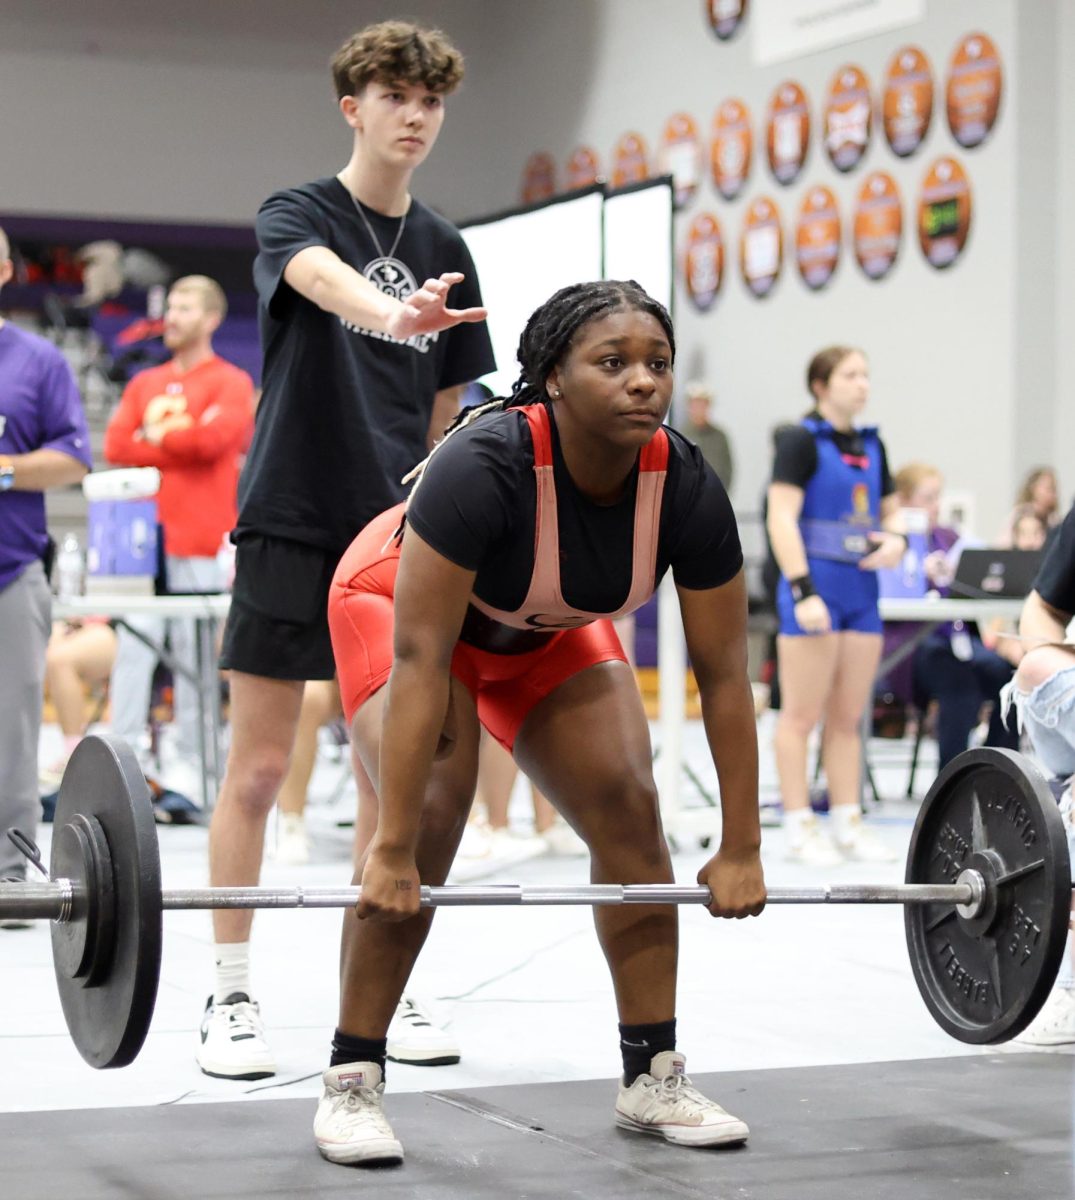 START. Sophomore ZiaYiah Bookman deadlifting on Saturday, Feb. 3, 2024 at Willis High School. Bookman started her deadlift with her first attempt being 160 lbs  then proceeding to 200 lbs and 232 lbs at the end. “To be honest, I could have gone higher but stayed low,” Bookman said. “Going forward I need to keep pushing, you know, step out and do something.”  
